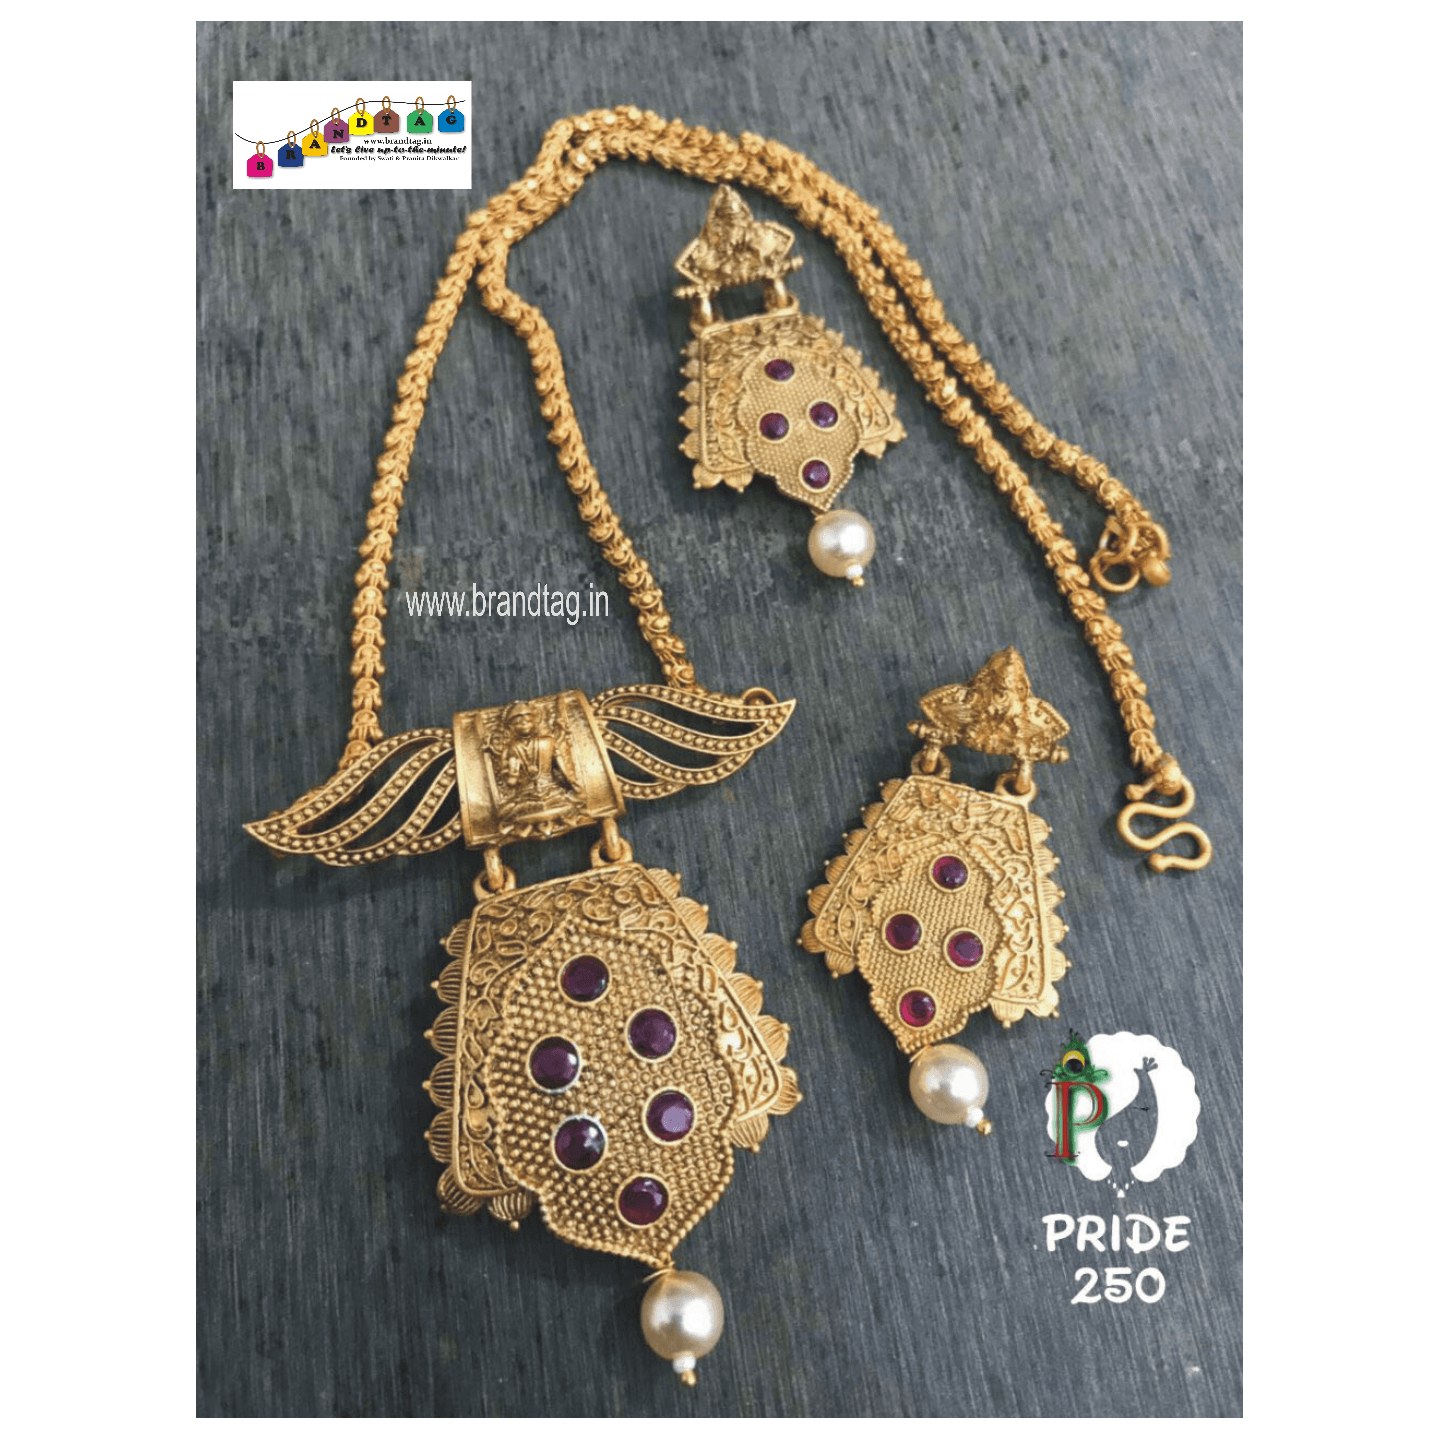 Exclusive Diwali Collection - Golden wings Necklace set!